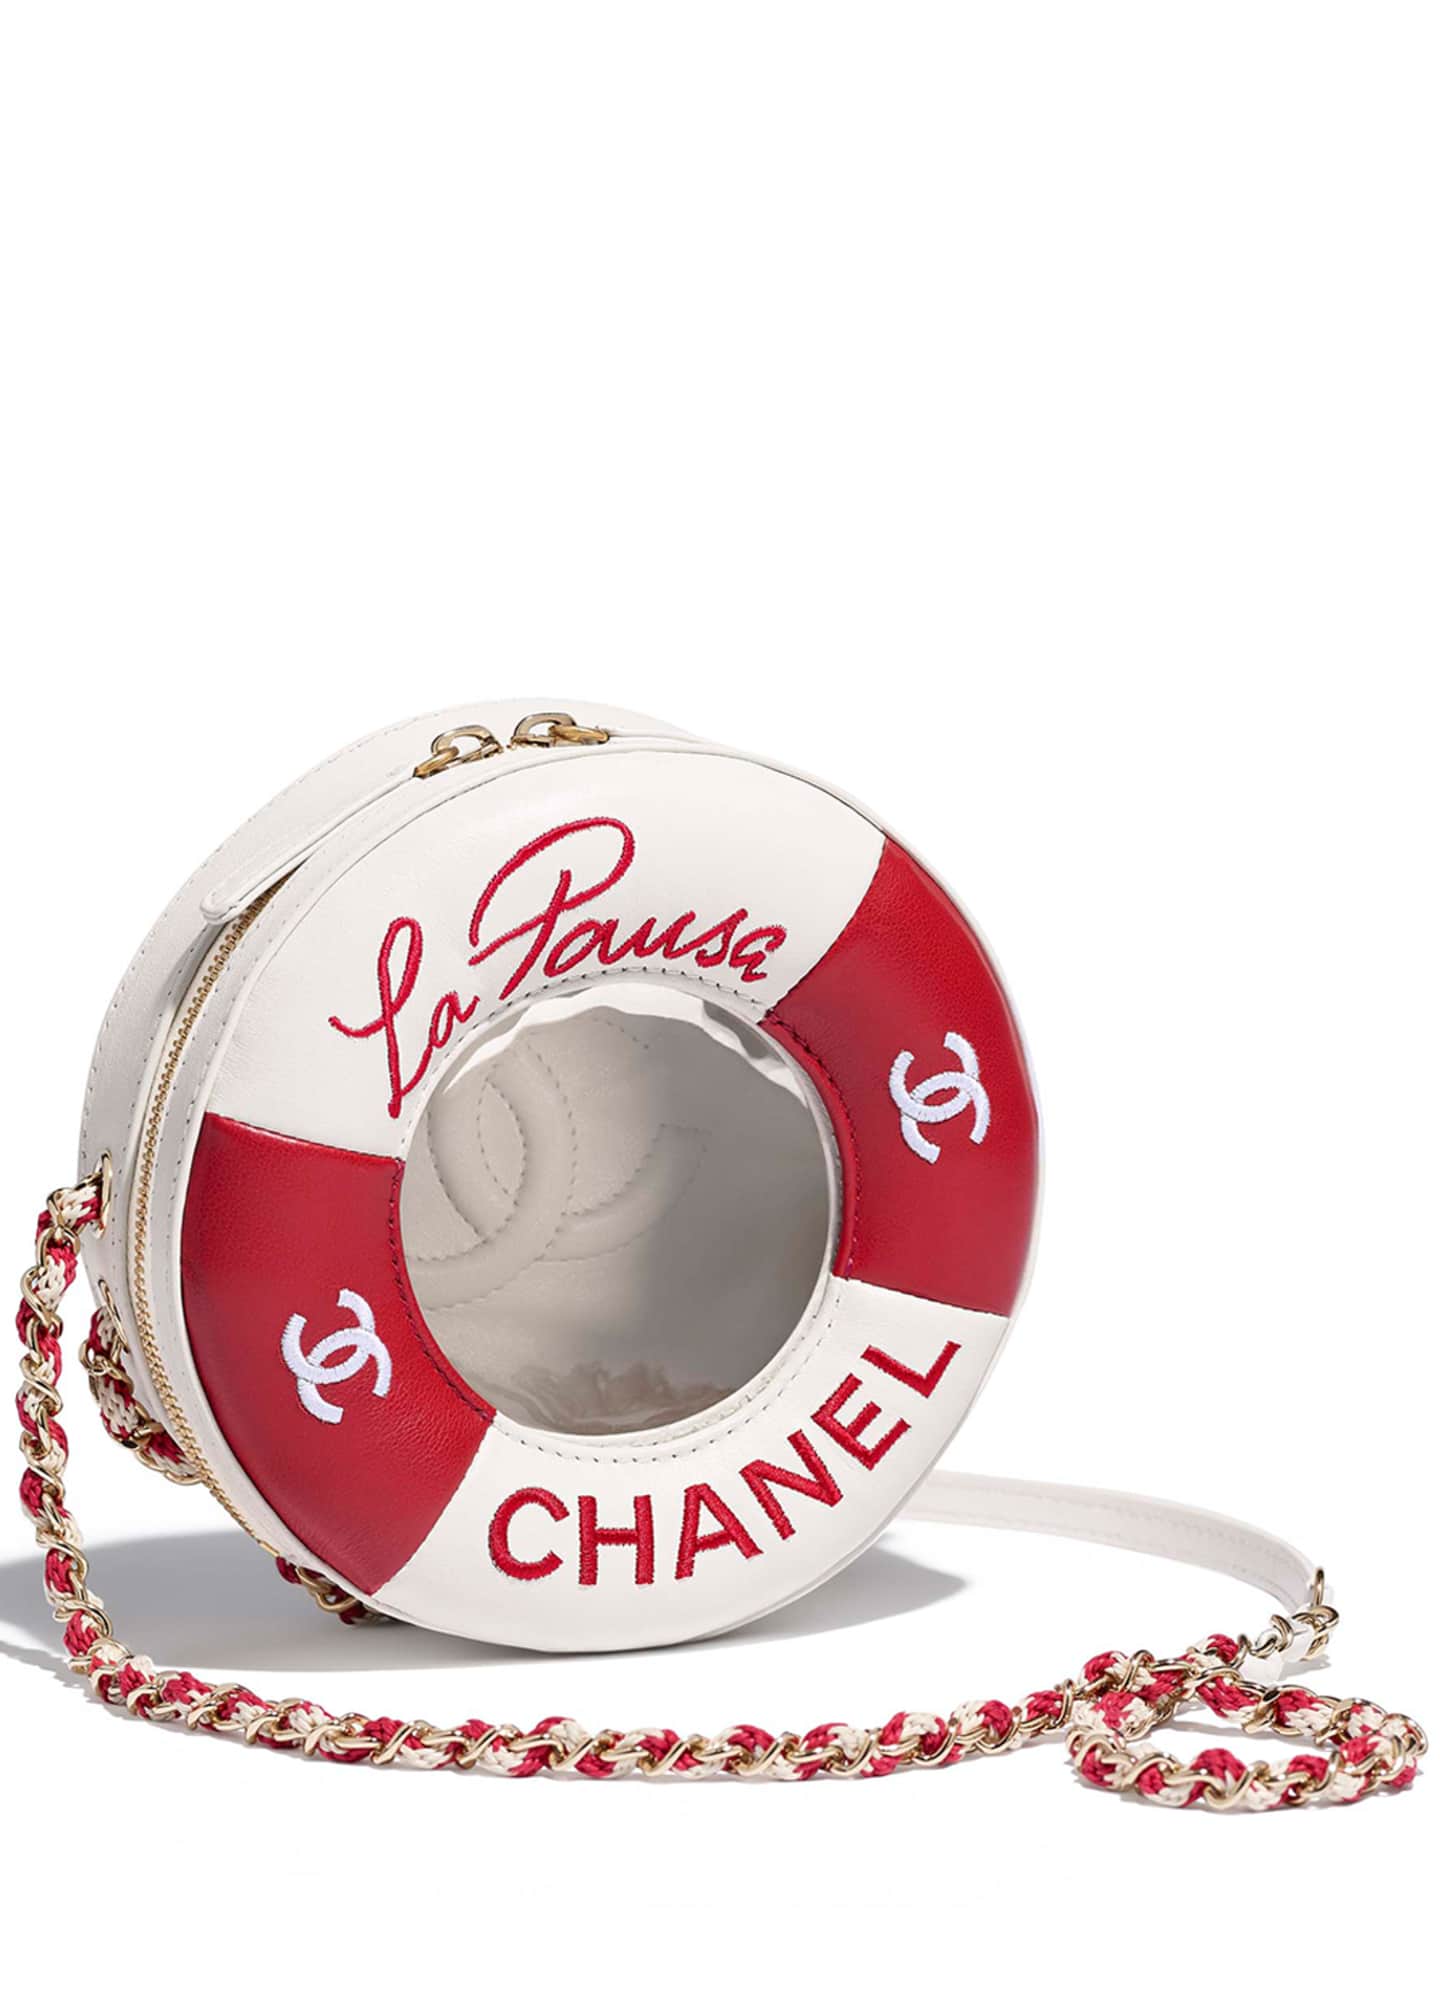 CHANEL Small Round Bag